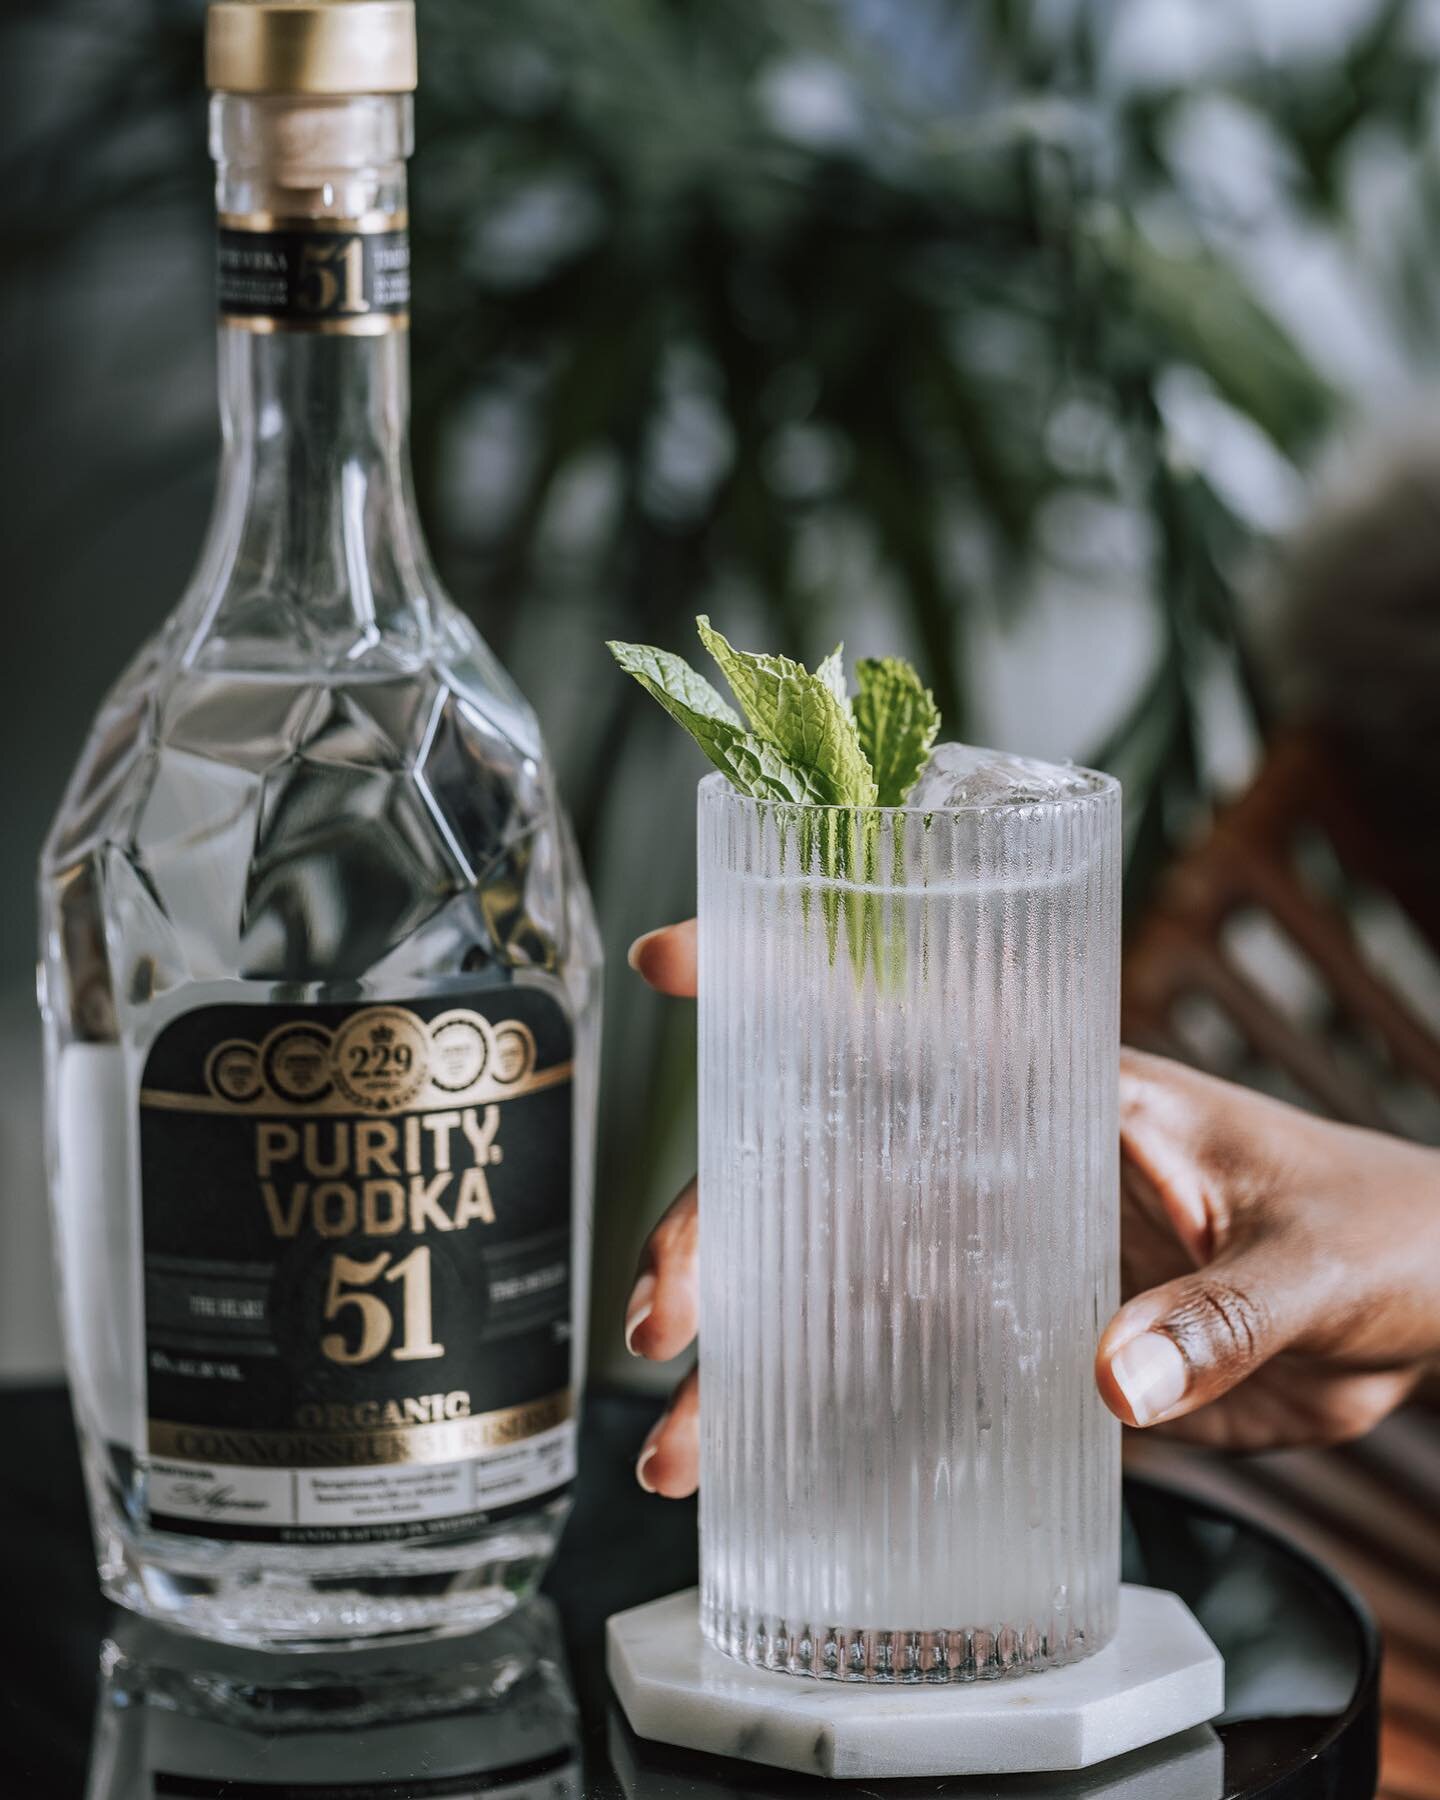 We&rsquo;re having a smooth start to our week. How about you?

#PurityVodka #vodkalovers #bestvodka #cocktailsofinstagram